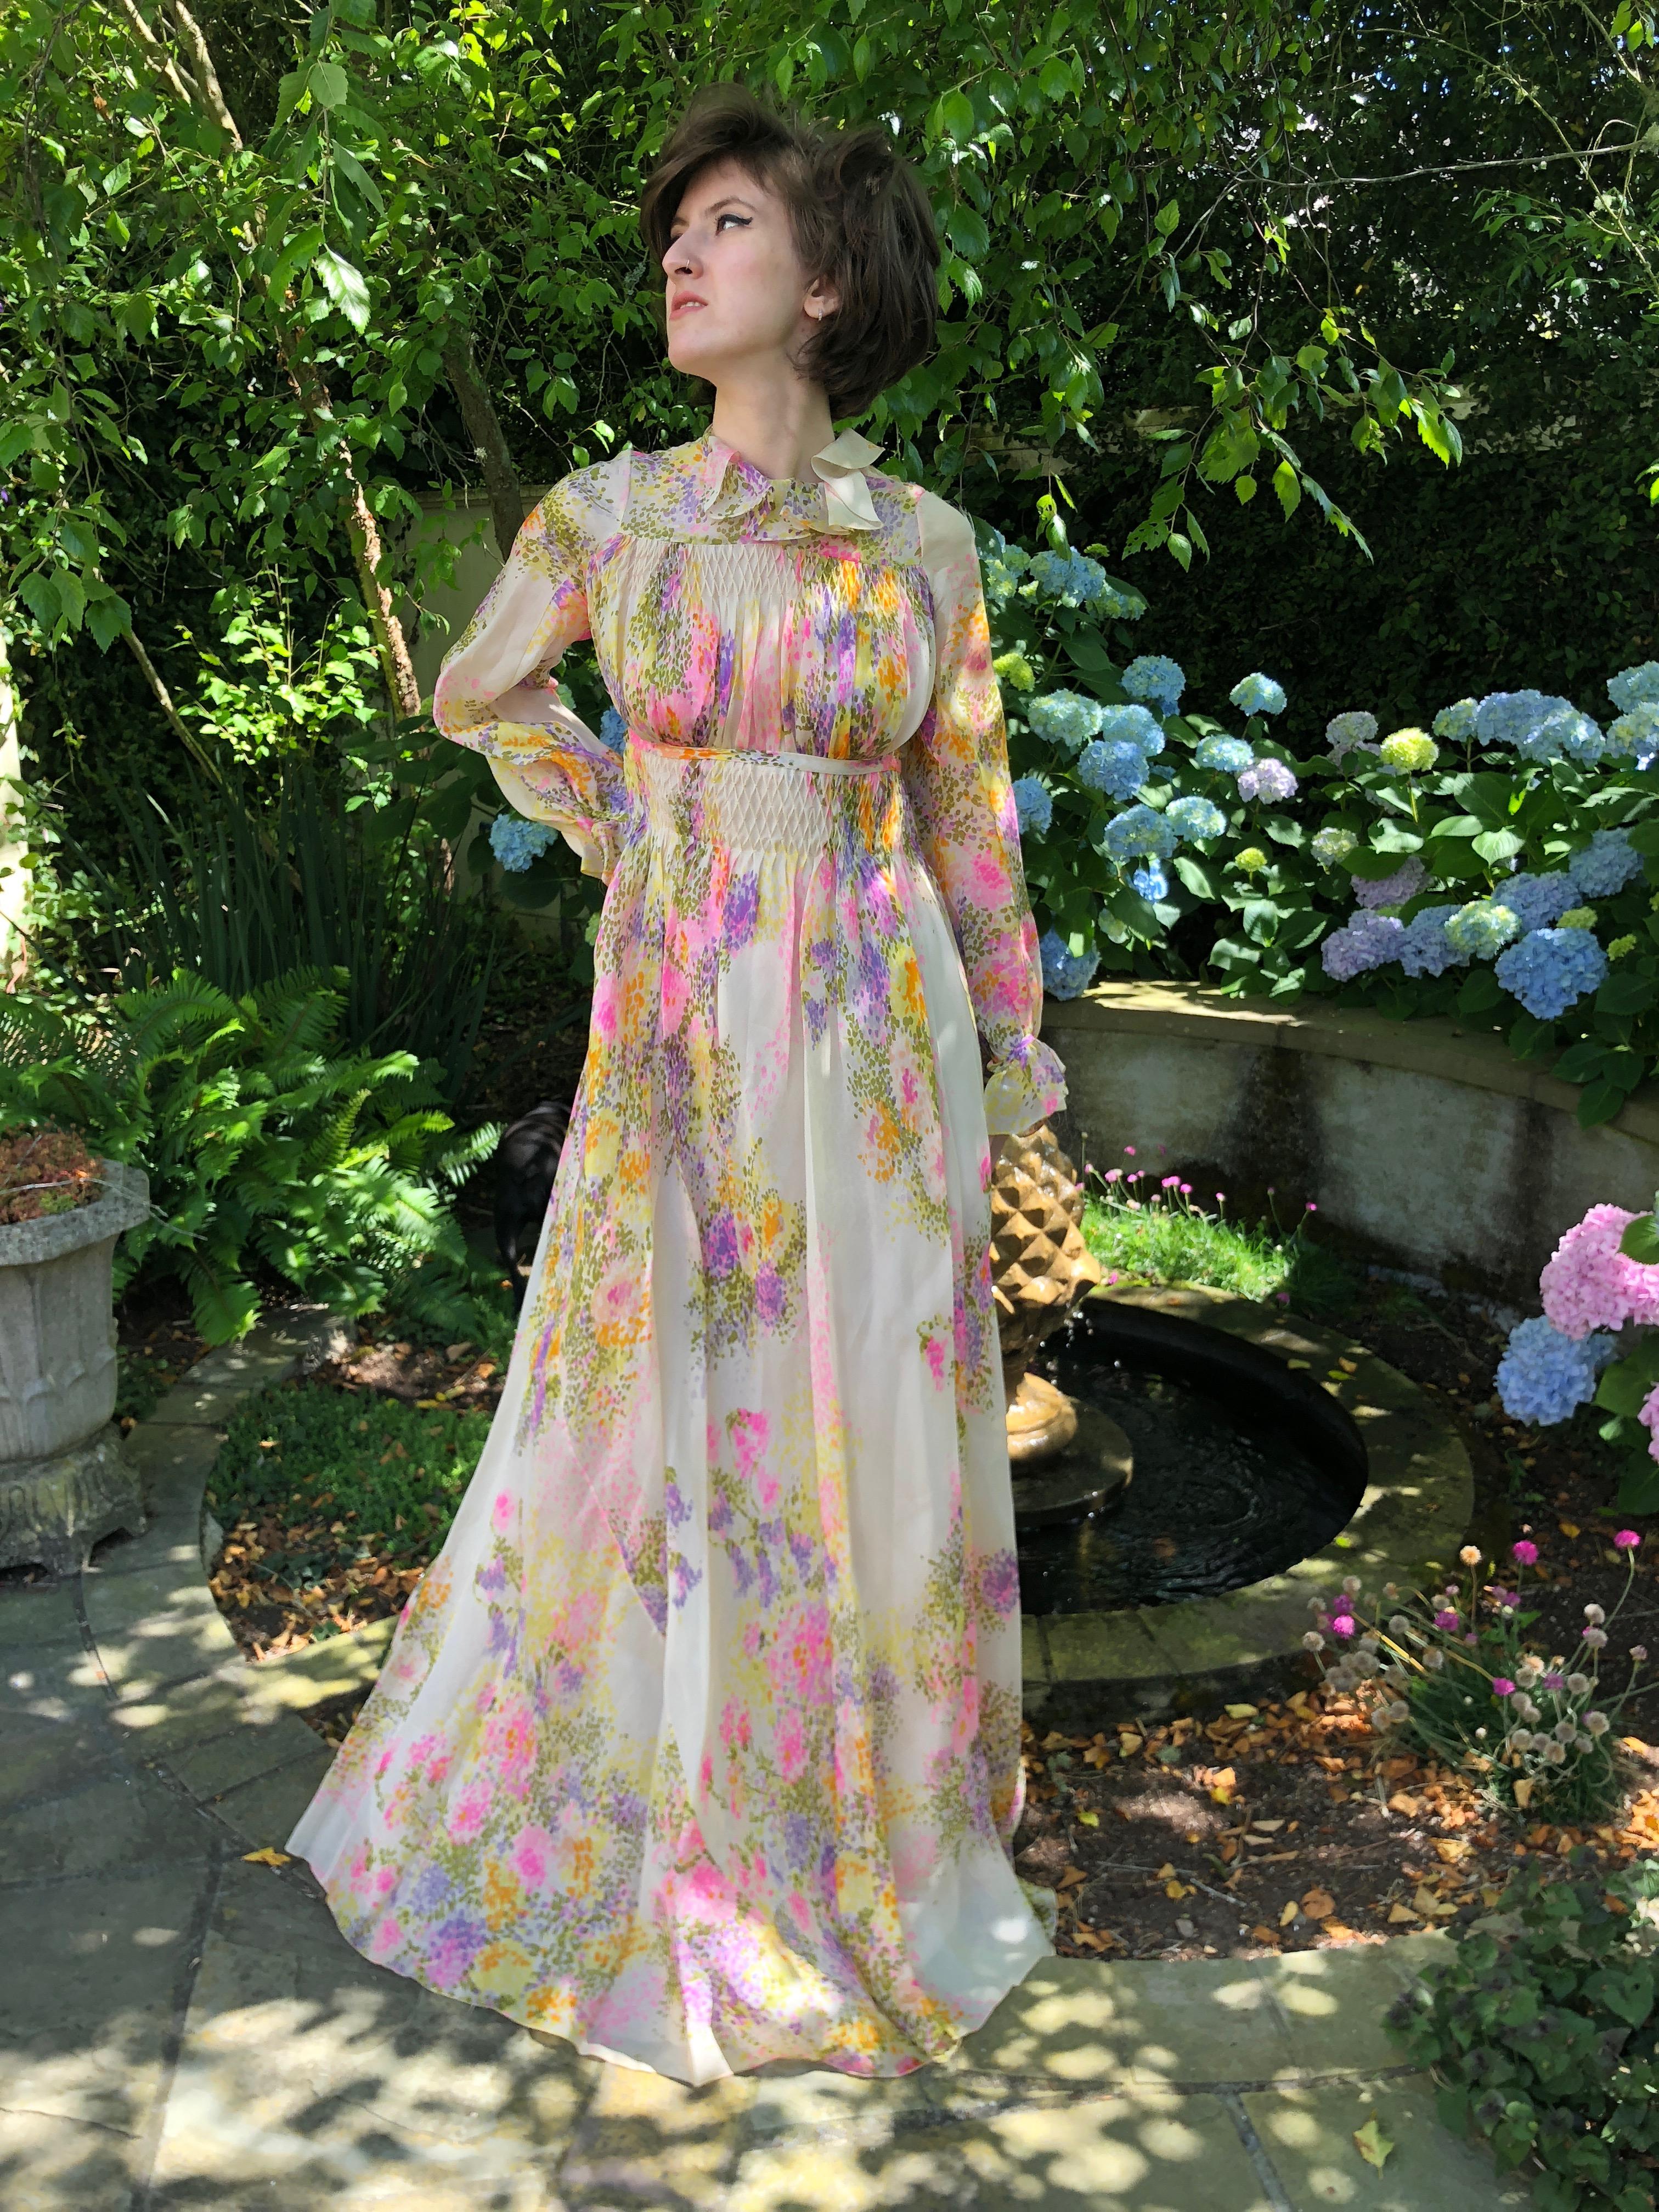 Cardinali Ruffle Silk Chiffon Floral Evening Dress with Pin Tuck Details, 1970s  For Sale 6